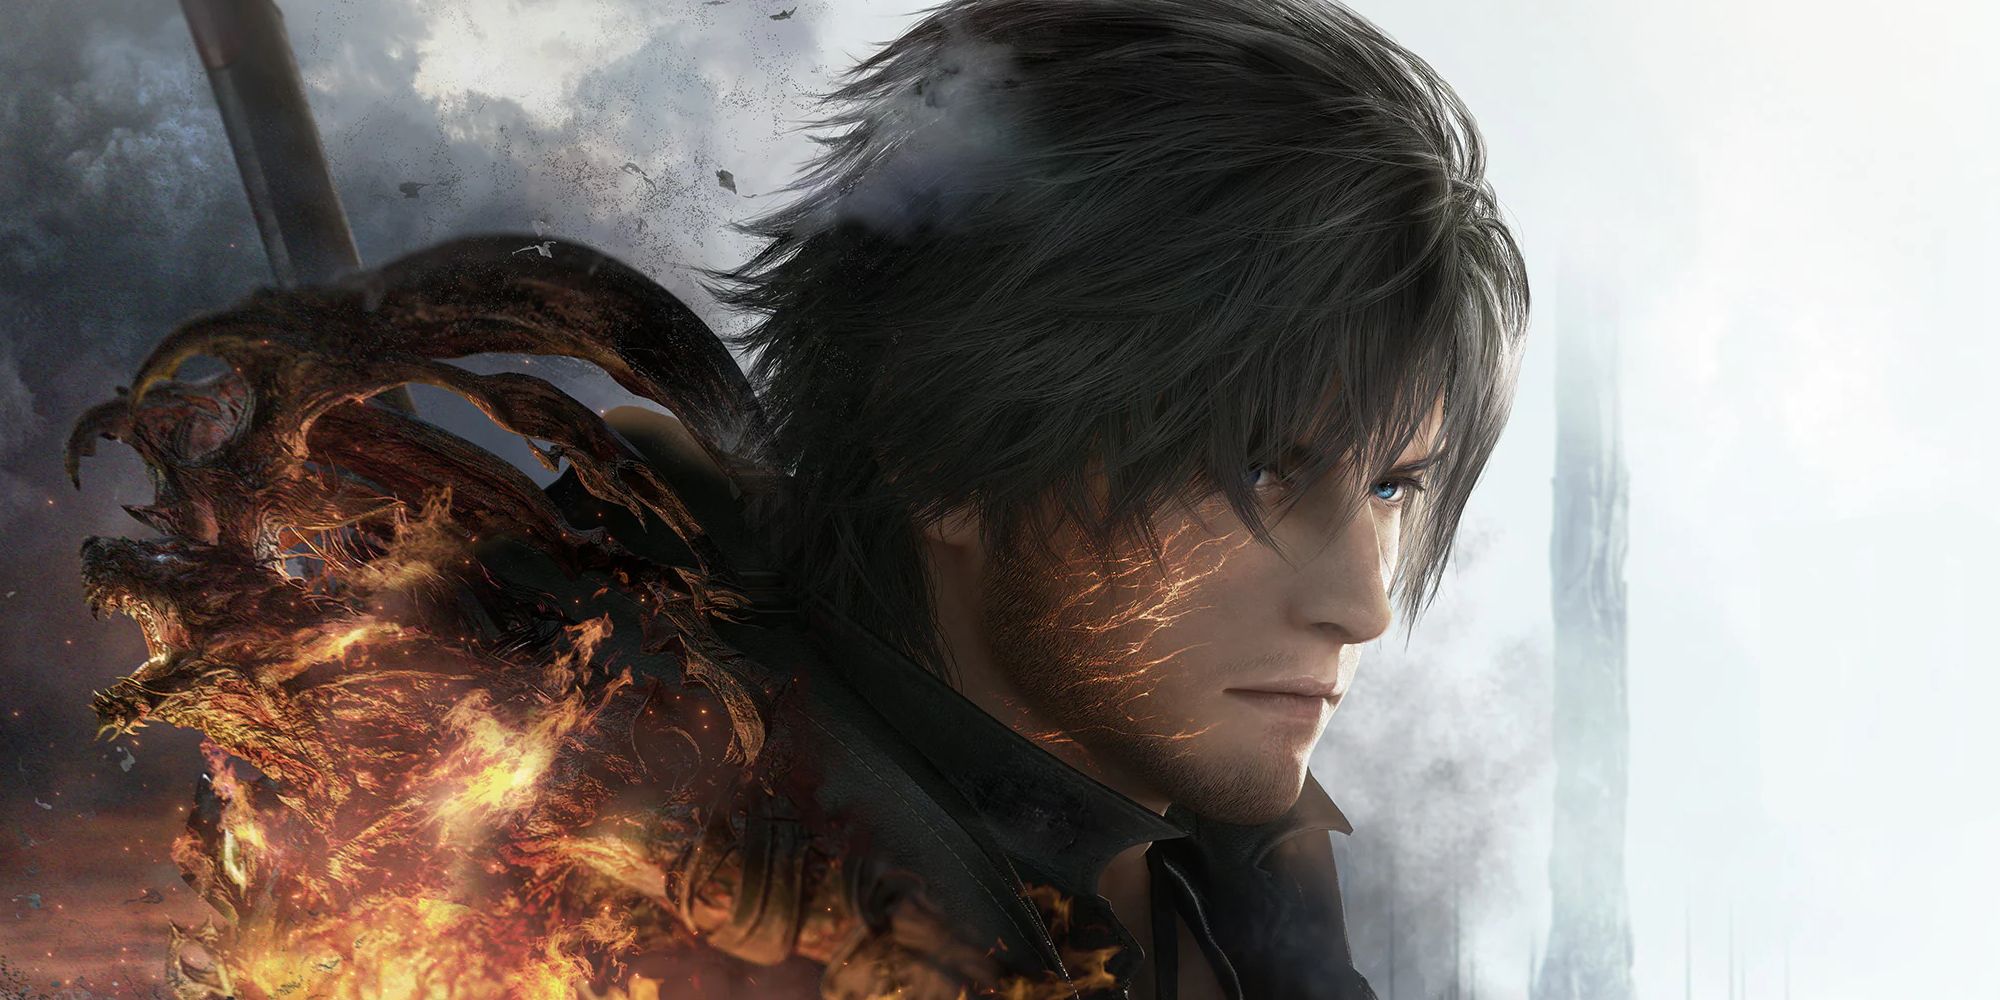 A zoomed portion of Final Fantasy 16's cover art, showing a close-up on protagonist Clive's face next to Ifrit.